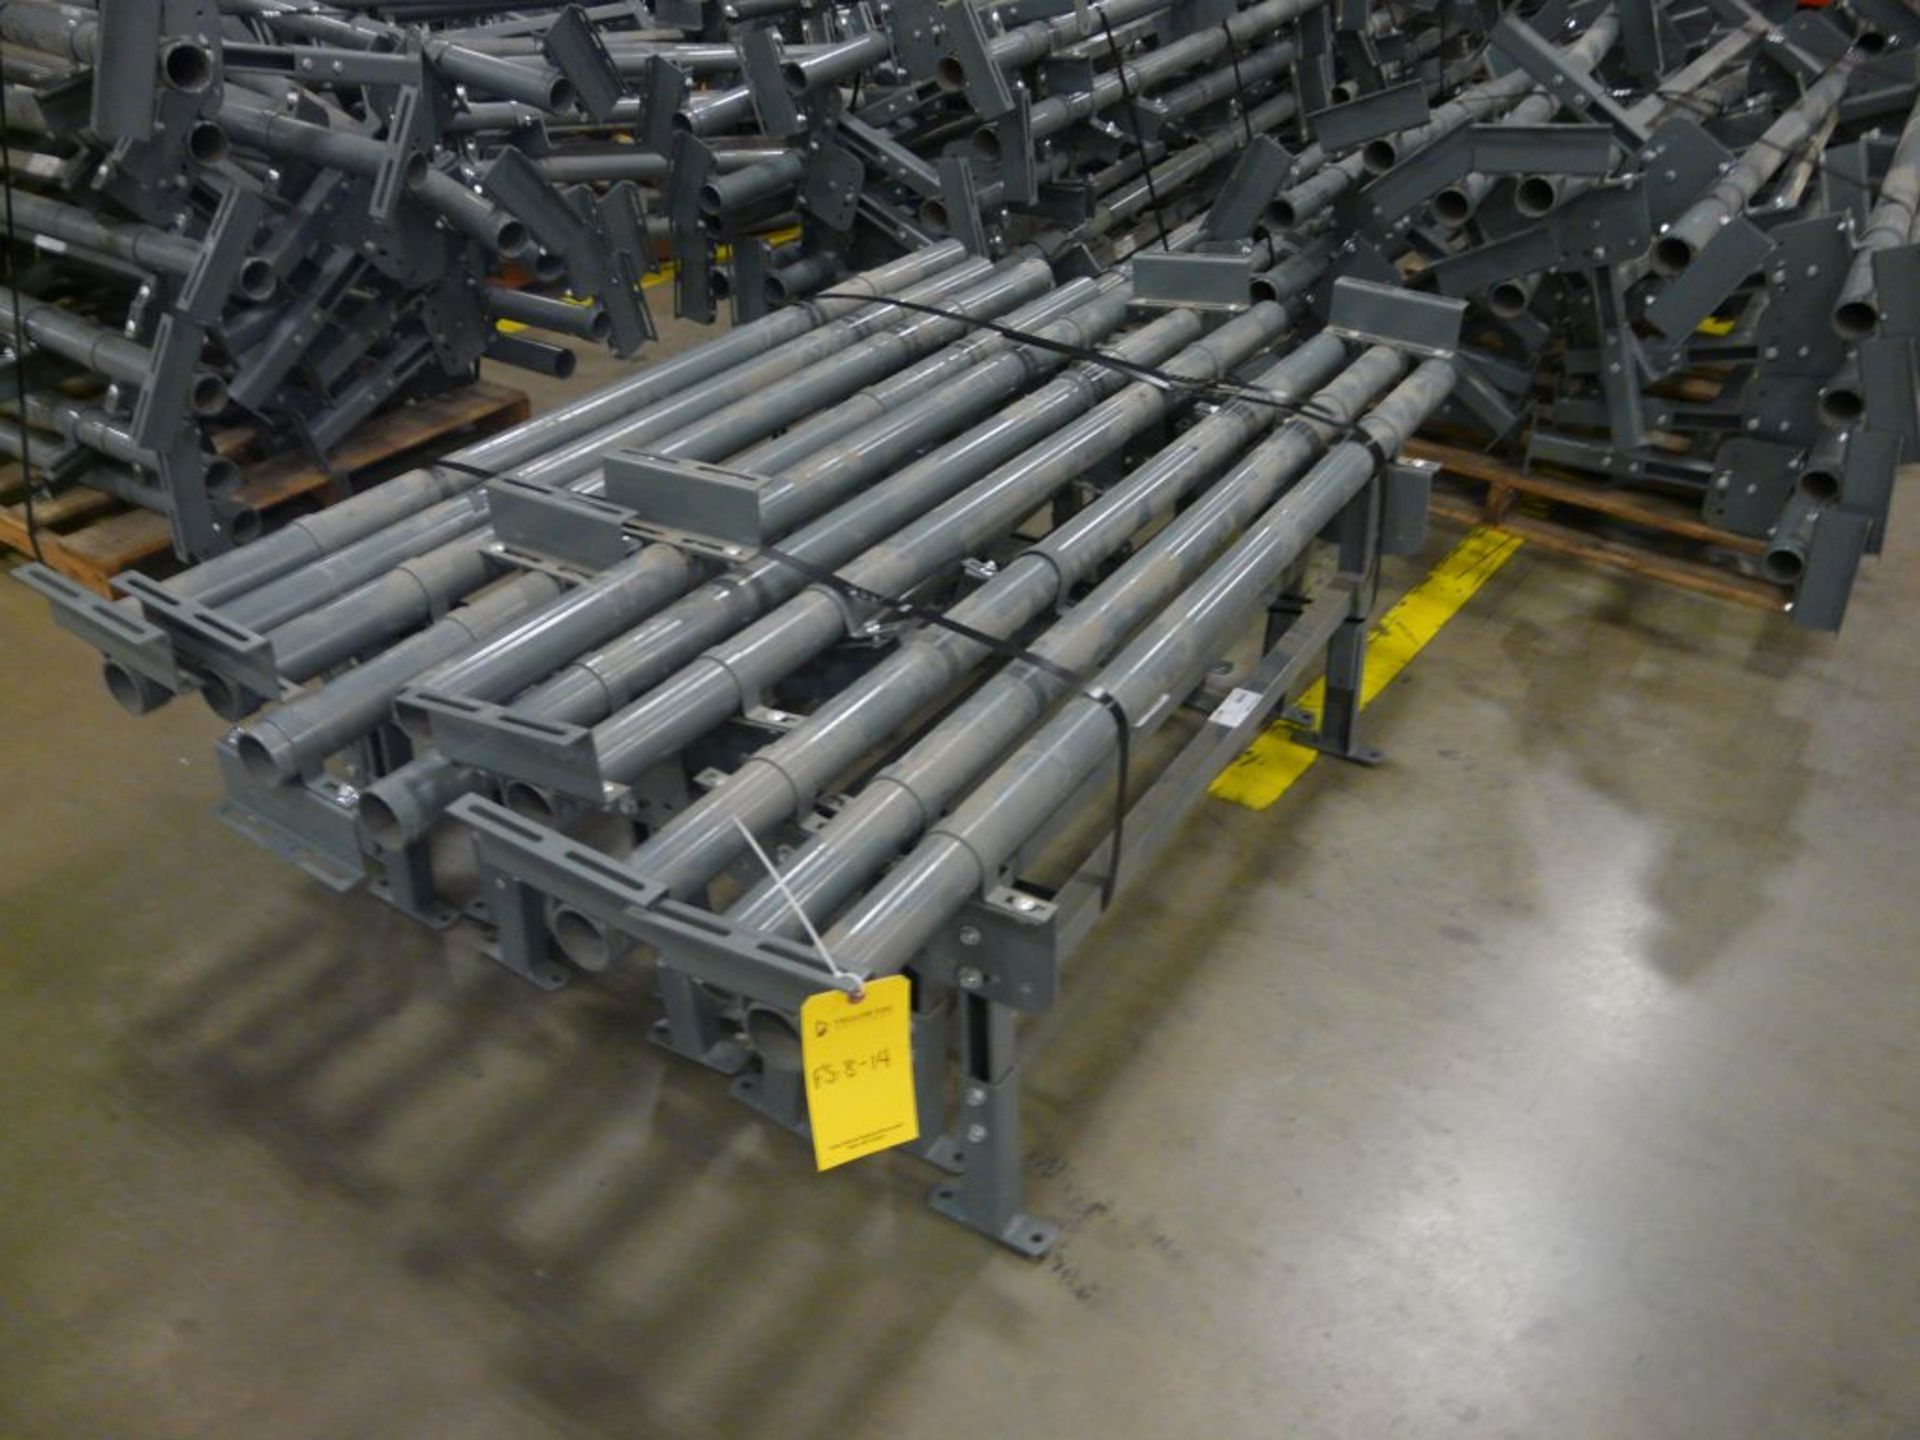 Lot of (10) USA Floor Supports - Brace: 71"L; Stand: 44"L x 19"H; Tag: 223862 - $30 Lot Loading Fee - Image 2 of 4